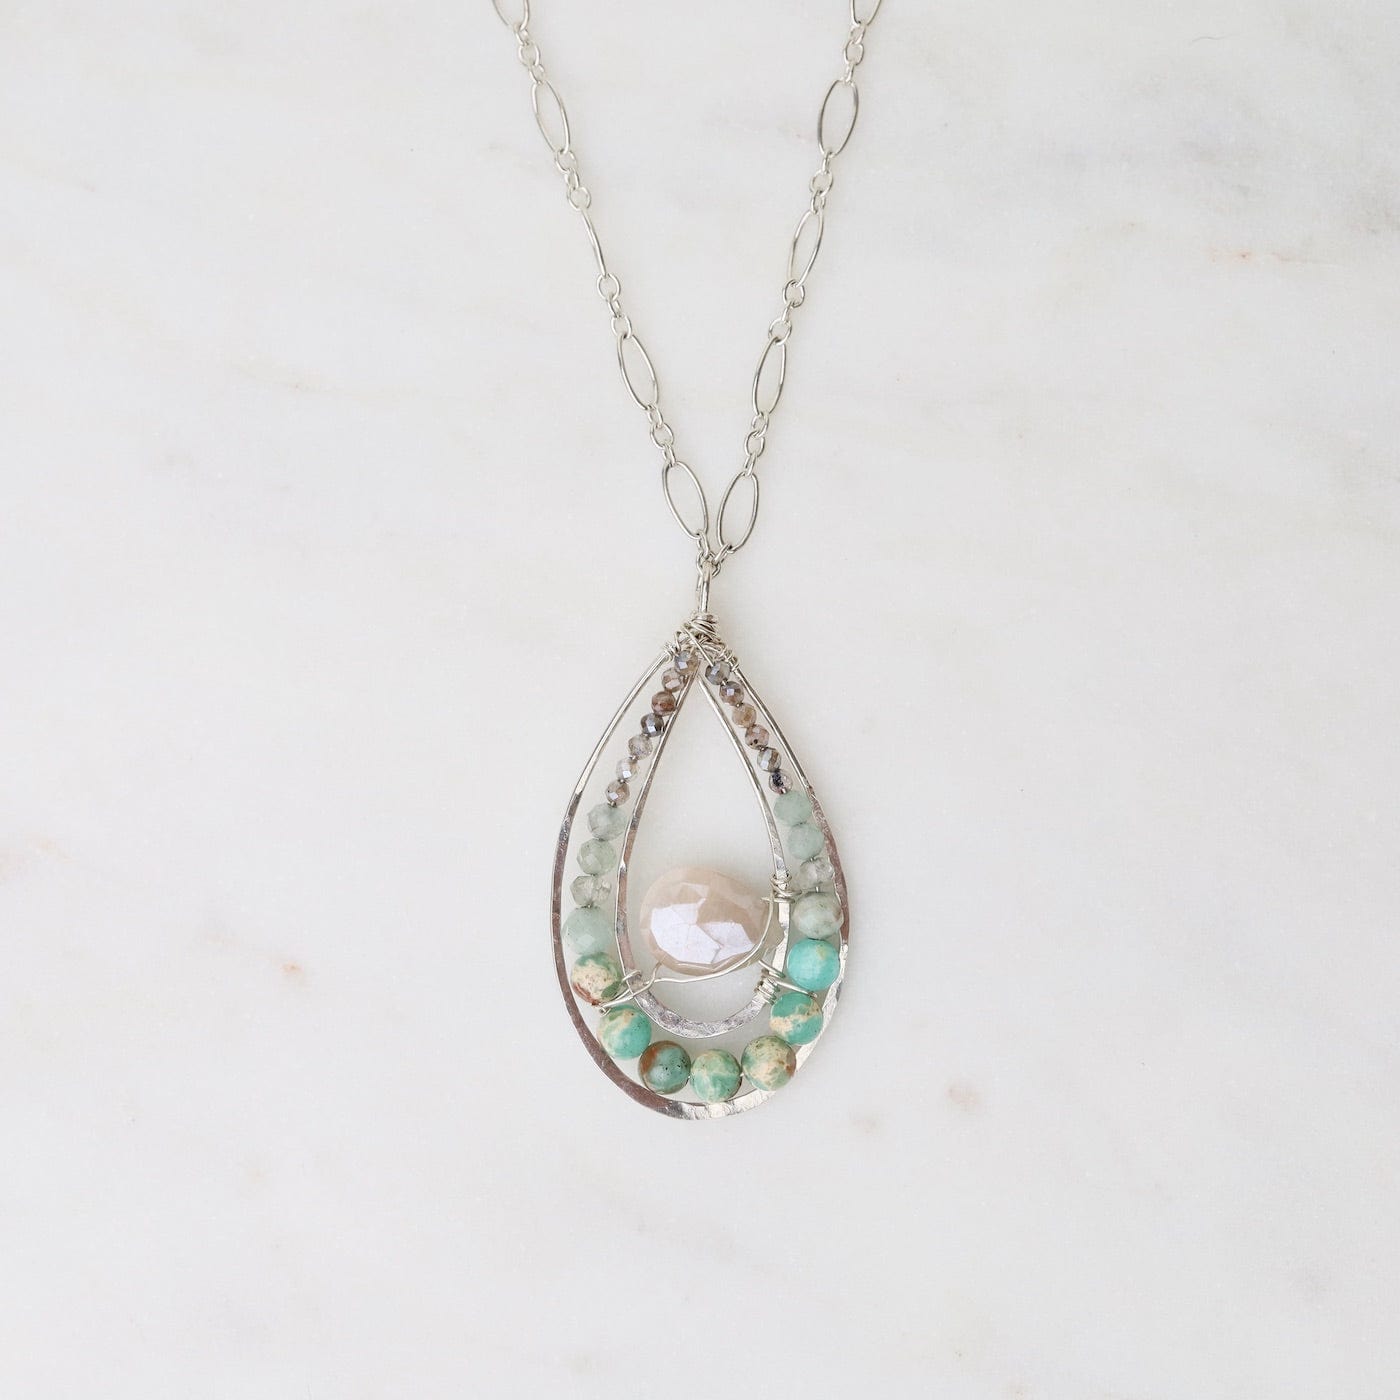 NKL Morning Frost Necklace